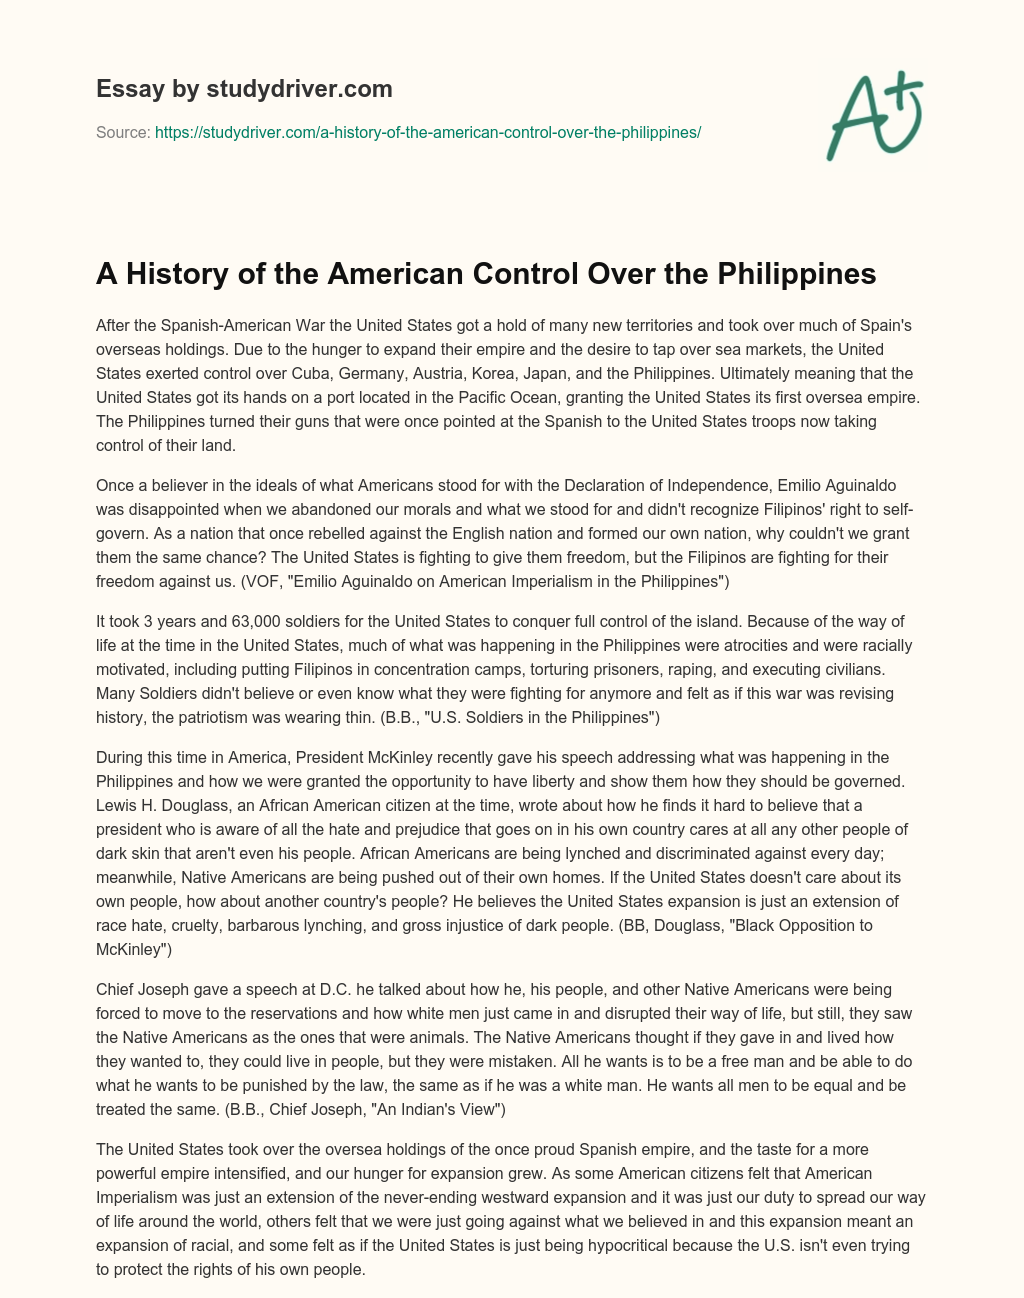 A History of the American Control over the Philippines essay